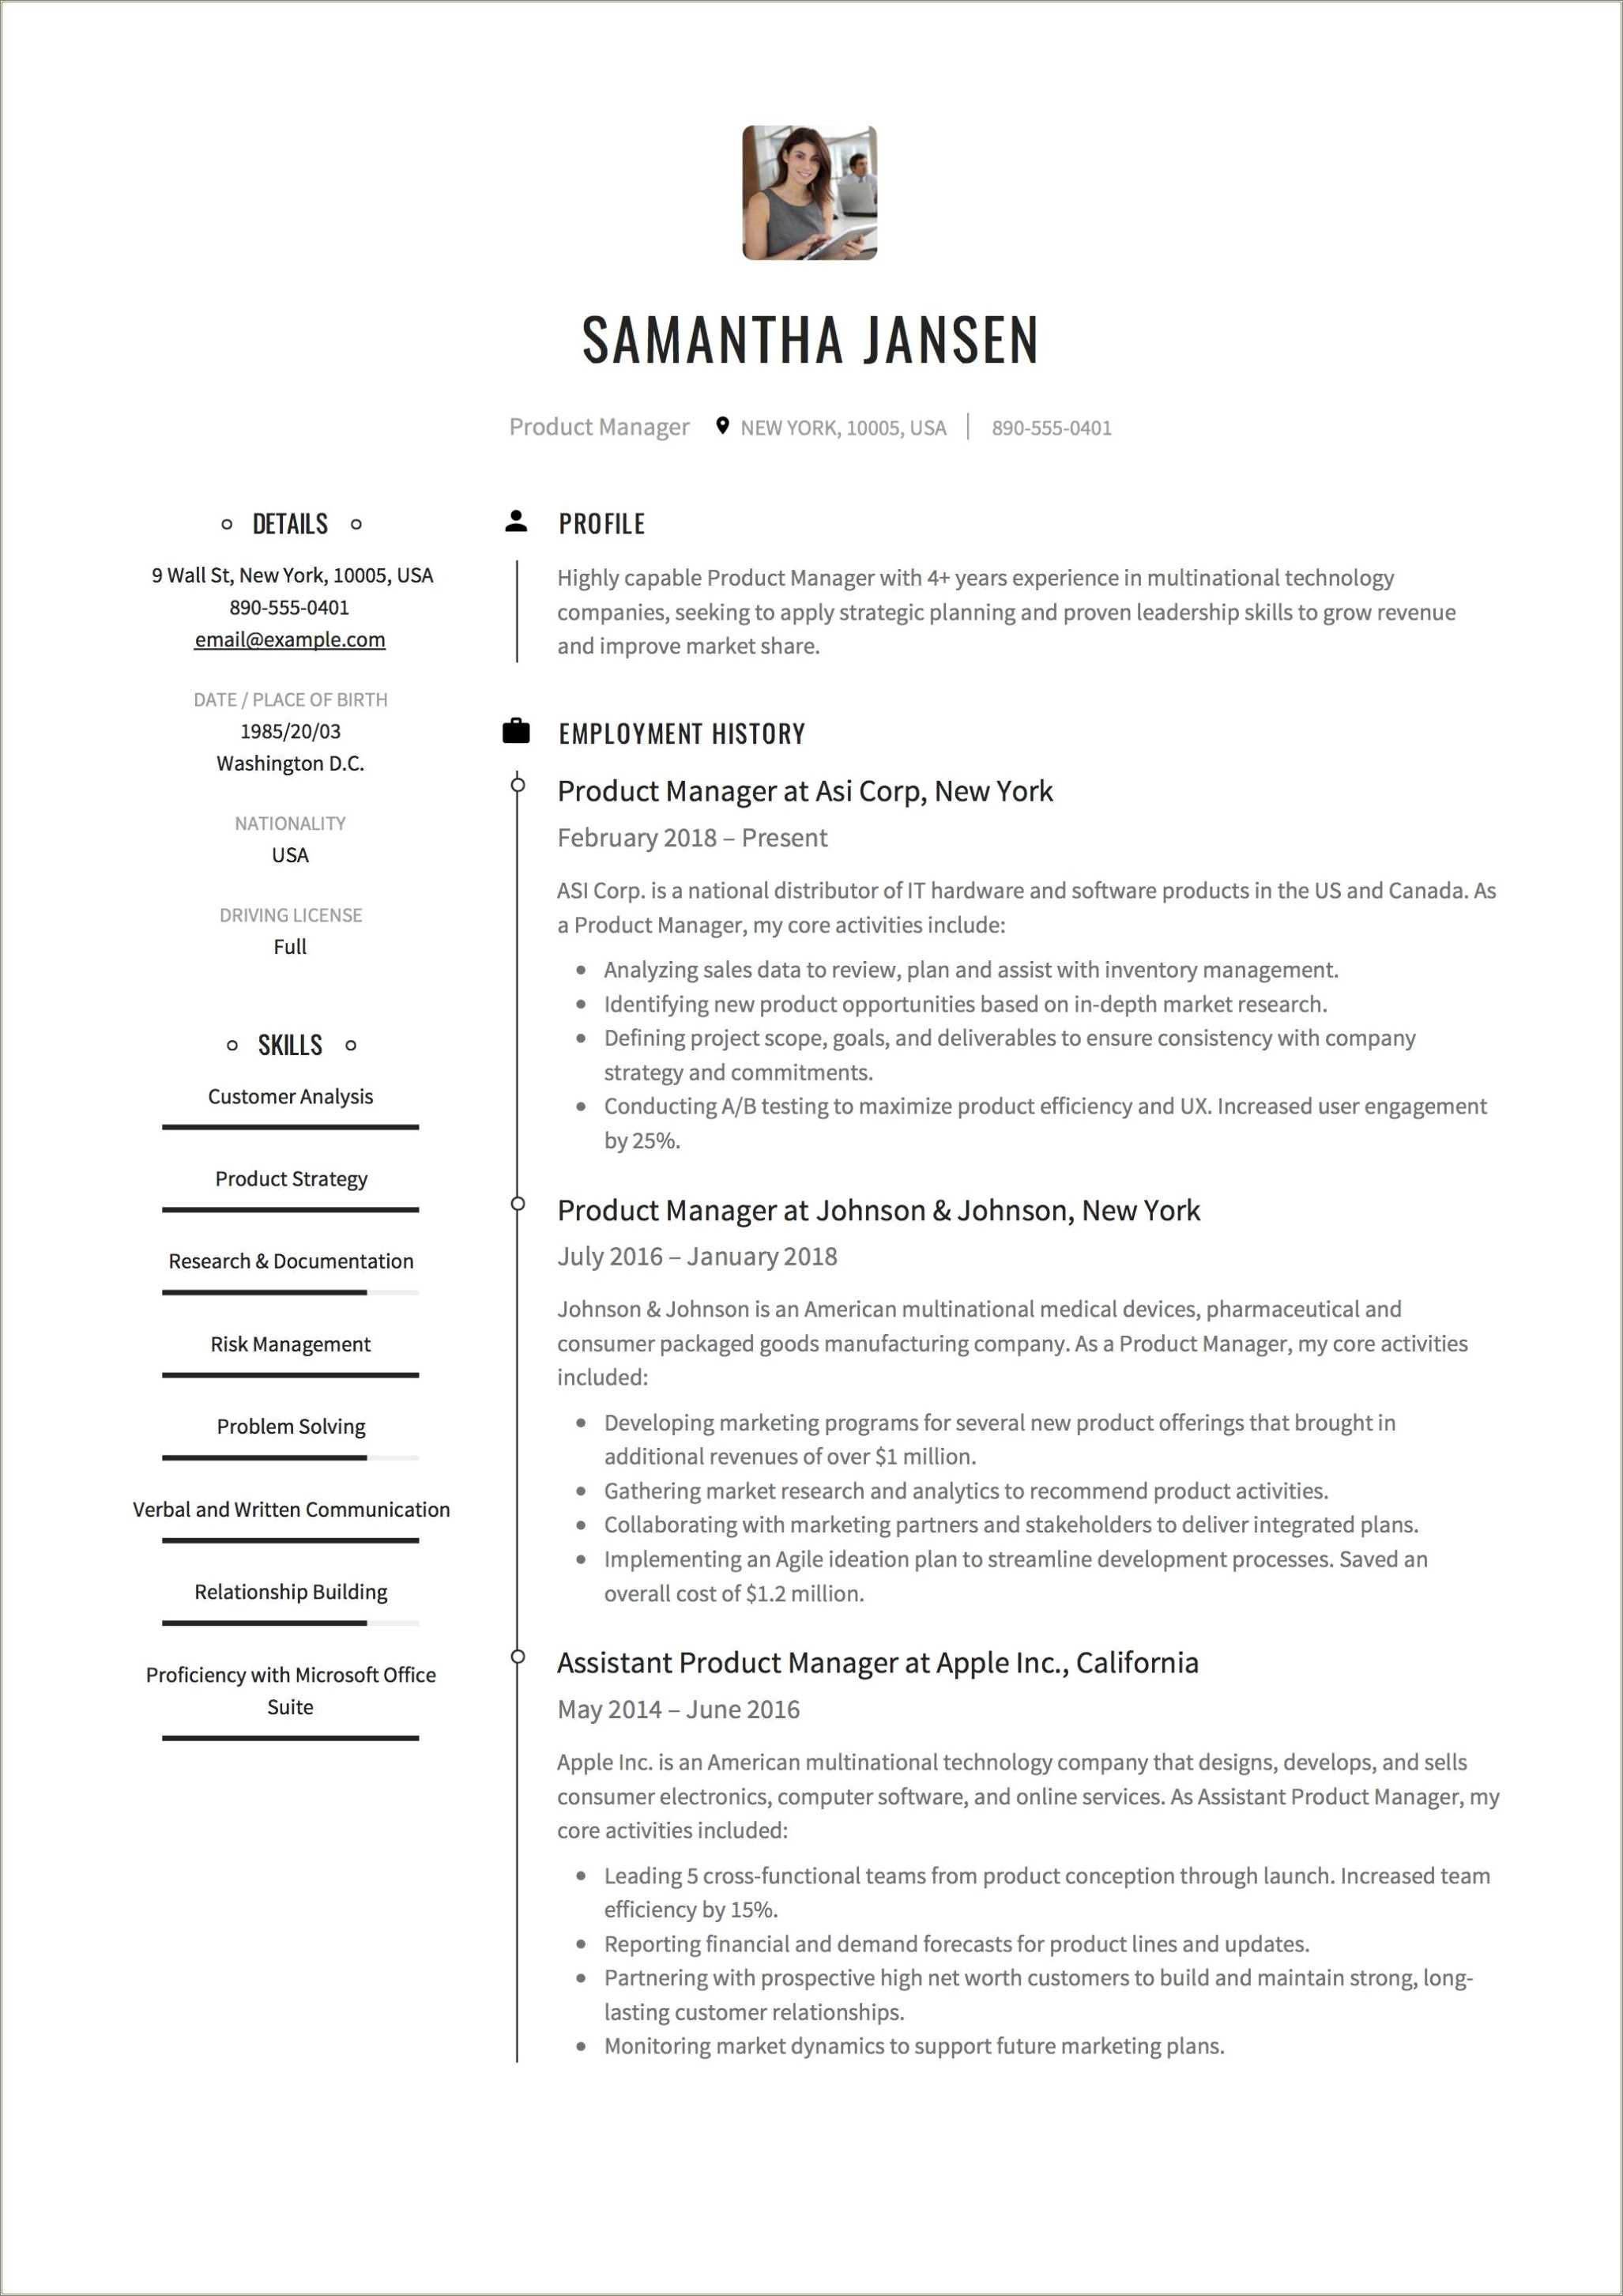 product-manager-manager-resume-example-resume-example-gallery